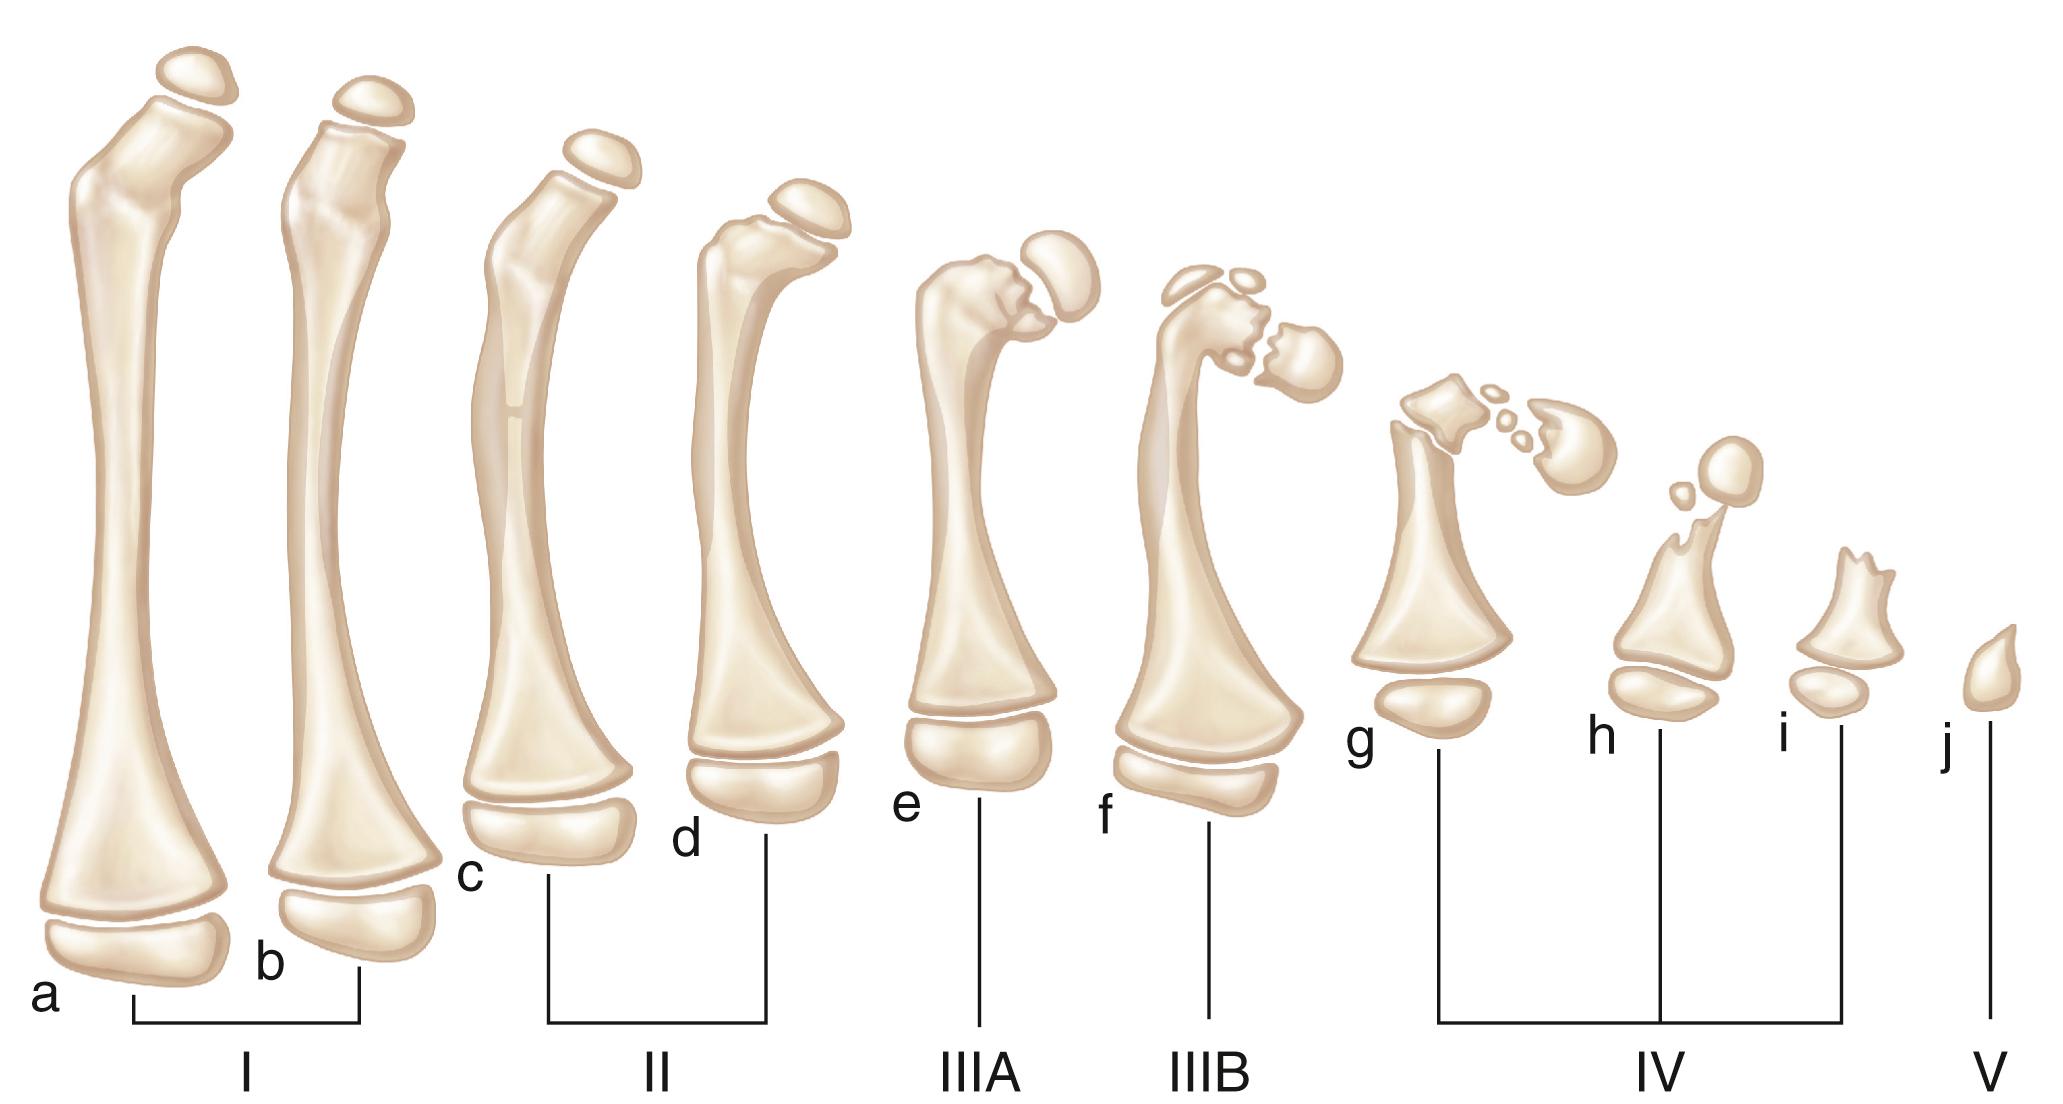 Fig. 21.15, Hamanishi classification of femoral deficiency.